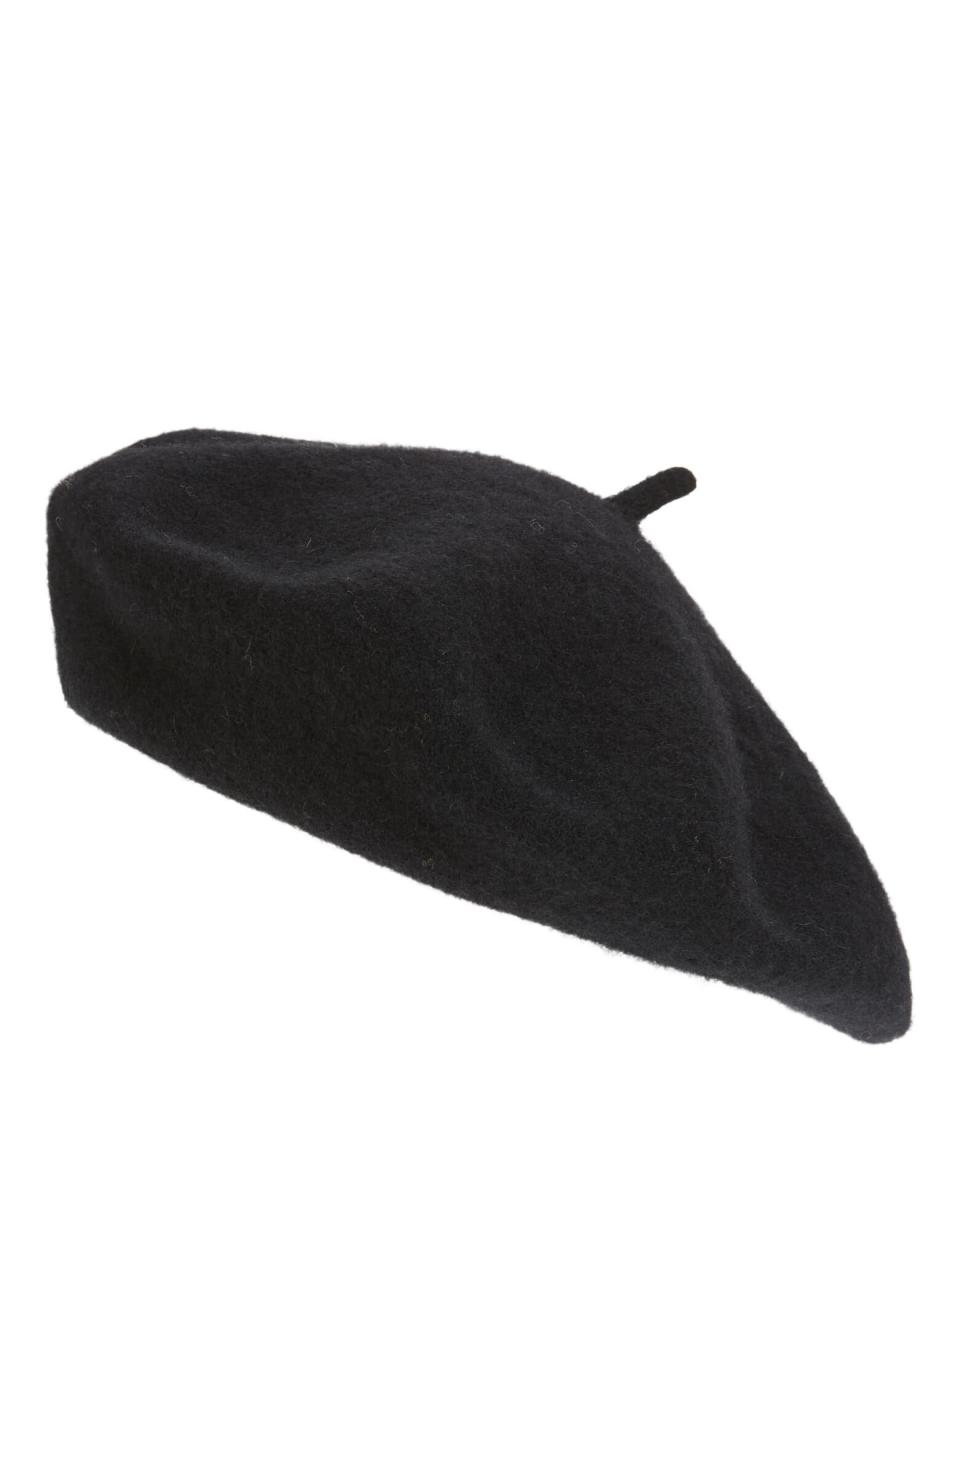 There is nothing more French than wearing a beret with bangs. And there is no greater compliment than saying someone looks French. It's just science. &lt;br&gt;&lt;br&gt; <strong><a href="https://shop.nordstrom.com/s/halogen-wool-blend-beret/4972409/lite?country=US&amp;currency=USD&amp;mrkgcl=760&amp;mrkgadid=3355612716&amp;utm_content=80782647720&amp;utm_term=pla-375498979905&amp;utm_channel=shopping_ret_p&amp;sp_source=google&amp;sp_campaign=6512984596&amp;rkg_id=0&amp;adpos=1o6&amp;creative=383012442688&amp;device=c&amp;matchtype=&amp;network=g&amp;gclid=EAIaIQobChMI36ue0YD35QIVF6SzCh3MXAWQEAQYBiABEgKKWPD_BwE" target="_blank" rel="noopener noreferrer">Get the Halogen Wool Blend Beret from Nordstrom for $29.</a></strong>